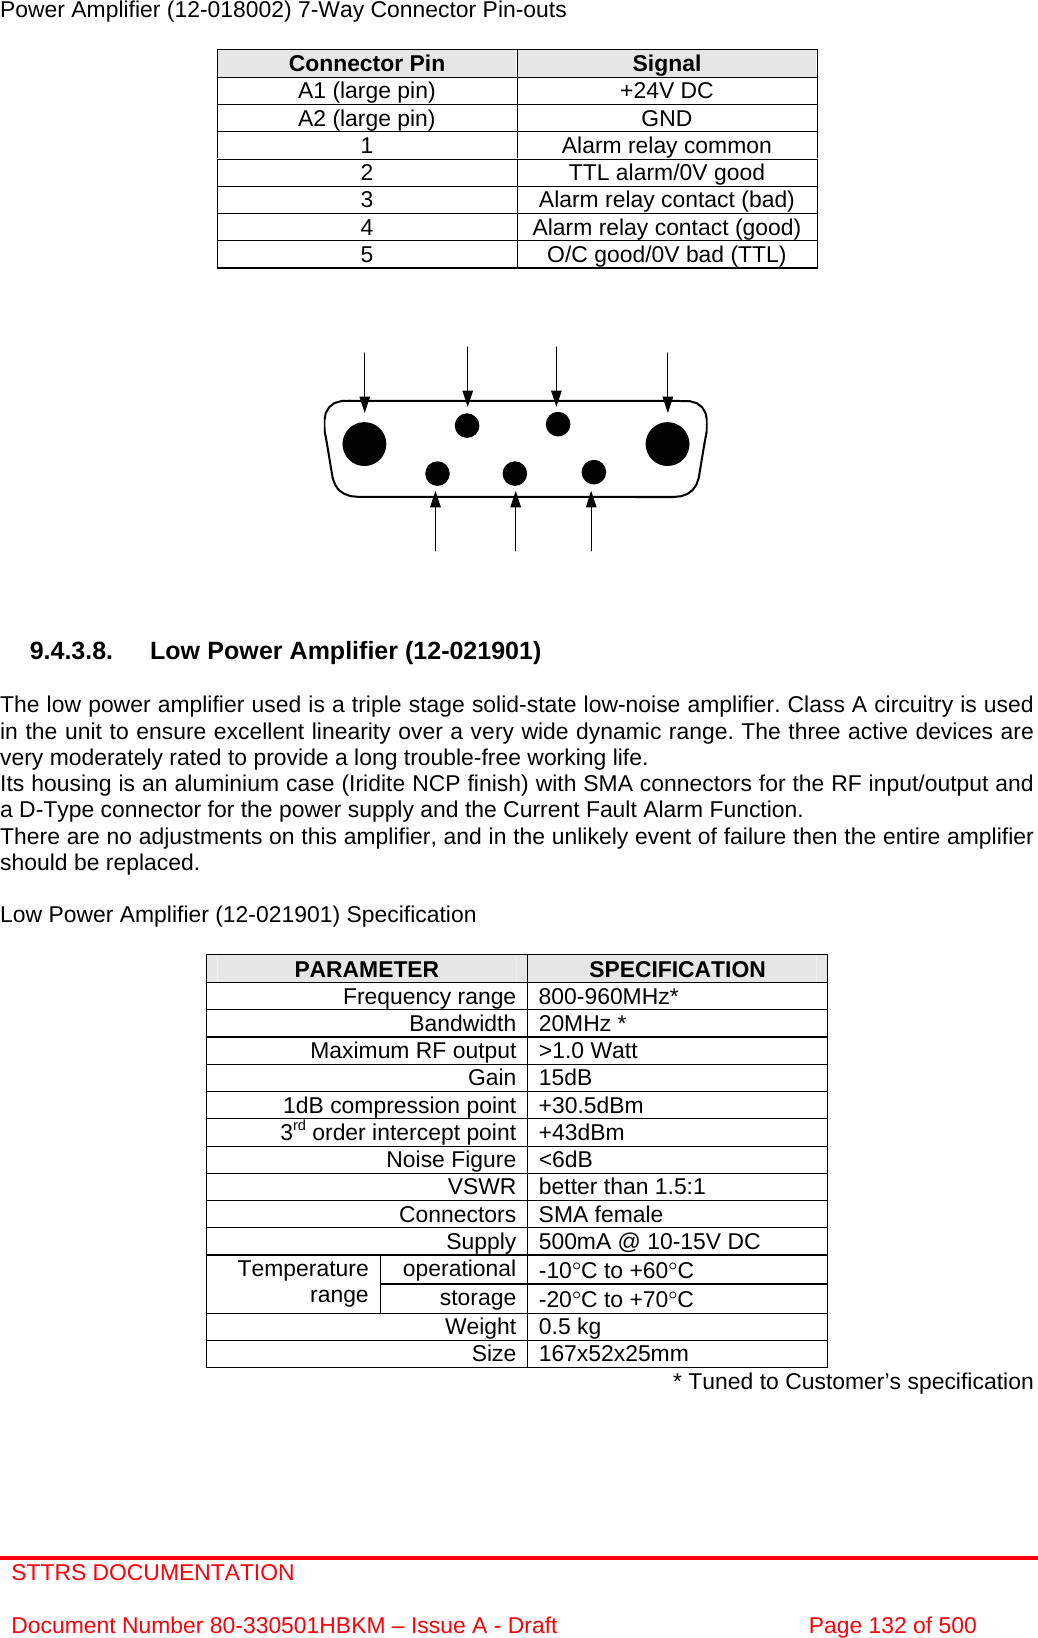 STTRS DOCUMENTATION  Document Number 80-330501HBKM – Issue A - Draft  Page 132 of 500   Power Amplifier (12-018002) 7-Way Connector Pin-outs  Connector Pin  Signal A1 (large pin)  +24V DC A2 (large pin)  GND 1  Alarm relay common 2  TTL alarm/0V good 3  Alarm relay contact (bad) 4  Alarm relay contact (good) 5  O/C good/0V bad (TTL)               9.4.3.8.  Low Power Amplifier (12-021901)  The low power amplifier used is a triple stage solid-state low-noise amplifier. Class A circuitry is used in the unit to ensure excellent linearity over a very wide dynamic range. The three active devices are very moderately rated to provide a long trouble-free working life.  Its housing is an aluminium case (Iridite NCP finish) with SMA connectors for the RF input/output and a D-Type connector for the power supply and the Current Fault Alarm Function. There are no adjustments on this amplifier, and in the unlikely event of failure then the entire amplifier should be replaced.  Low Power Amplifier (12-021901) Specification  PARAMETER  SPECIFICATION Frequency range 800-960MHz* Bandwidth 20MHz * Maximum RF output &gt;1.0 Watt Gain 15dB 1dB compression point +30.5dBm 3rd order intercept point +43dBm Noise Figure &lt;6dB VSWR better than 1.5:1 Connectors SMA female Supply 500mA @ 10-15V DC operational -10°C to +60°C Temperature range  storage -20°C to +70°C Weight 0.5 kg Size 167x52x25mm * Tuned to Customer’s specification 